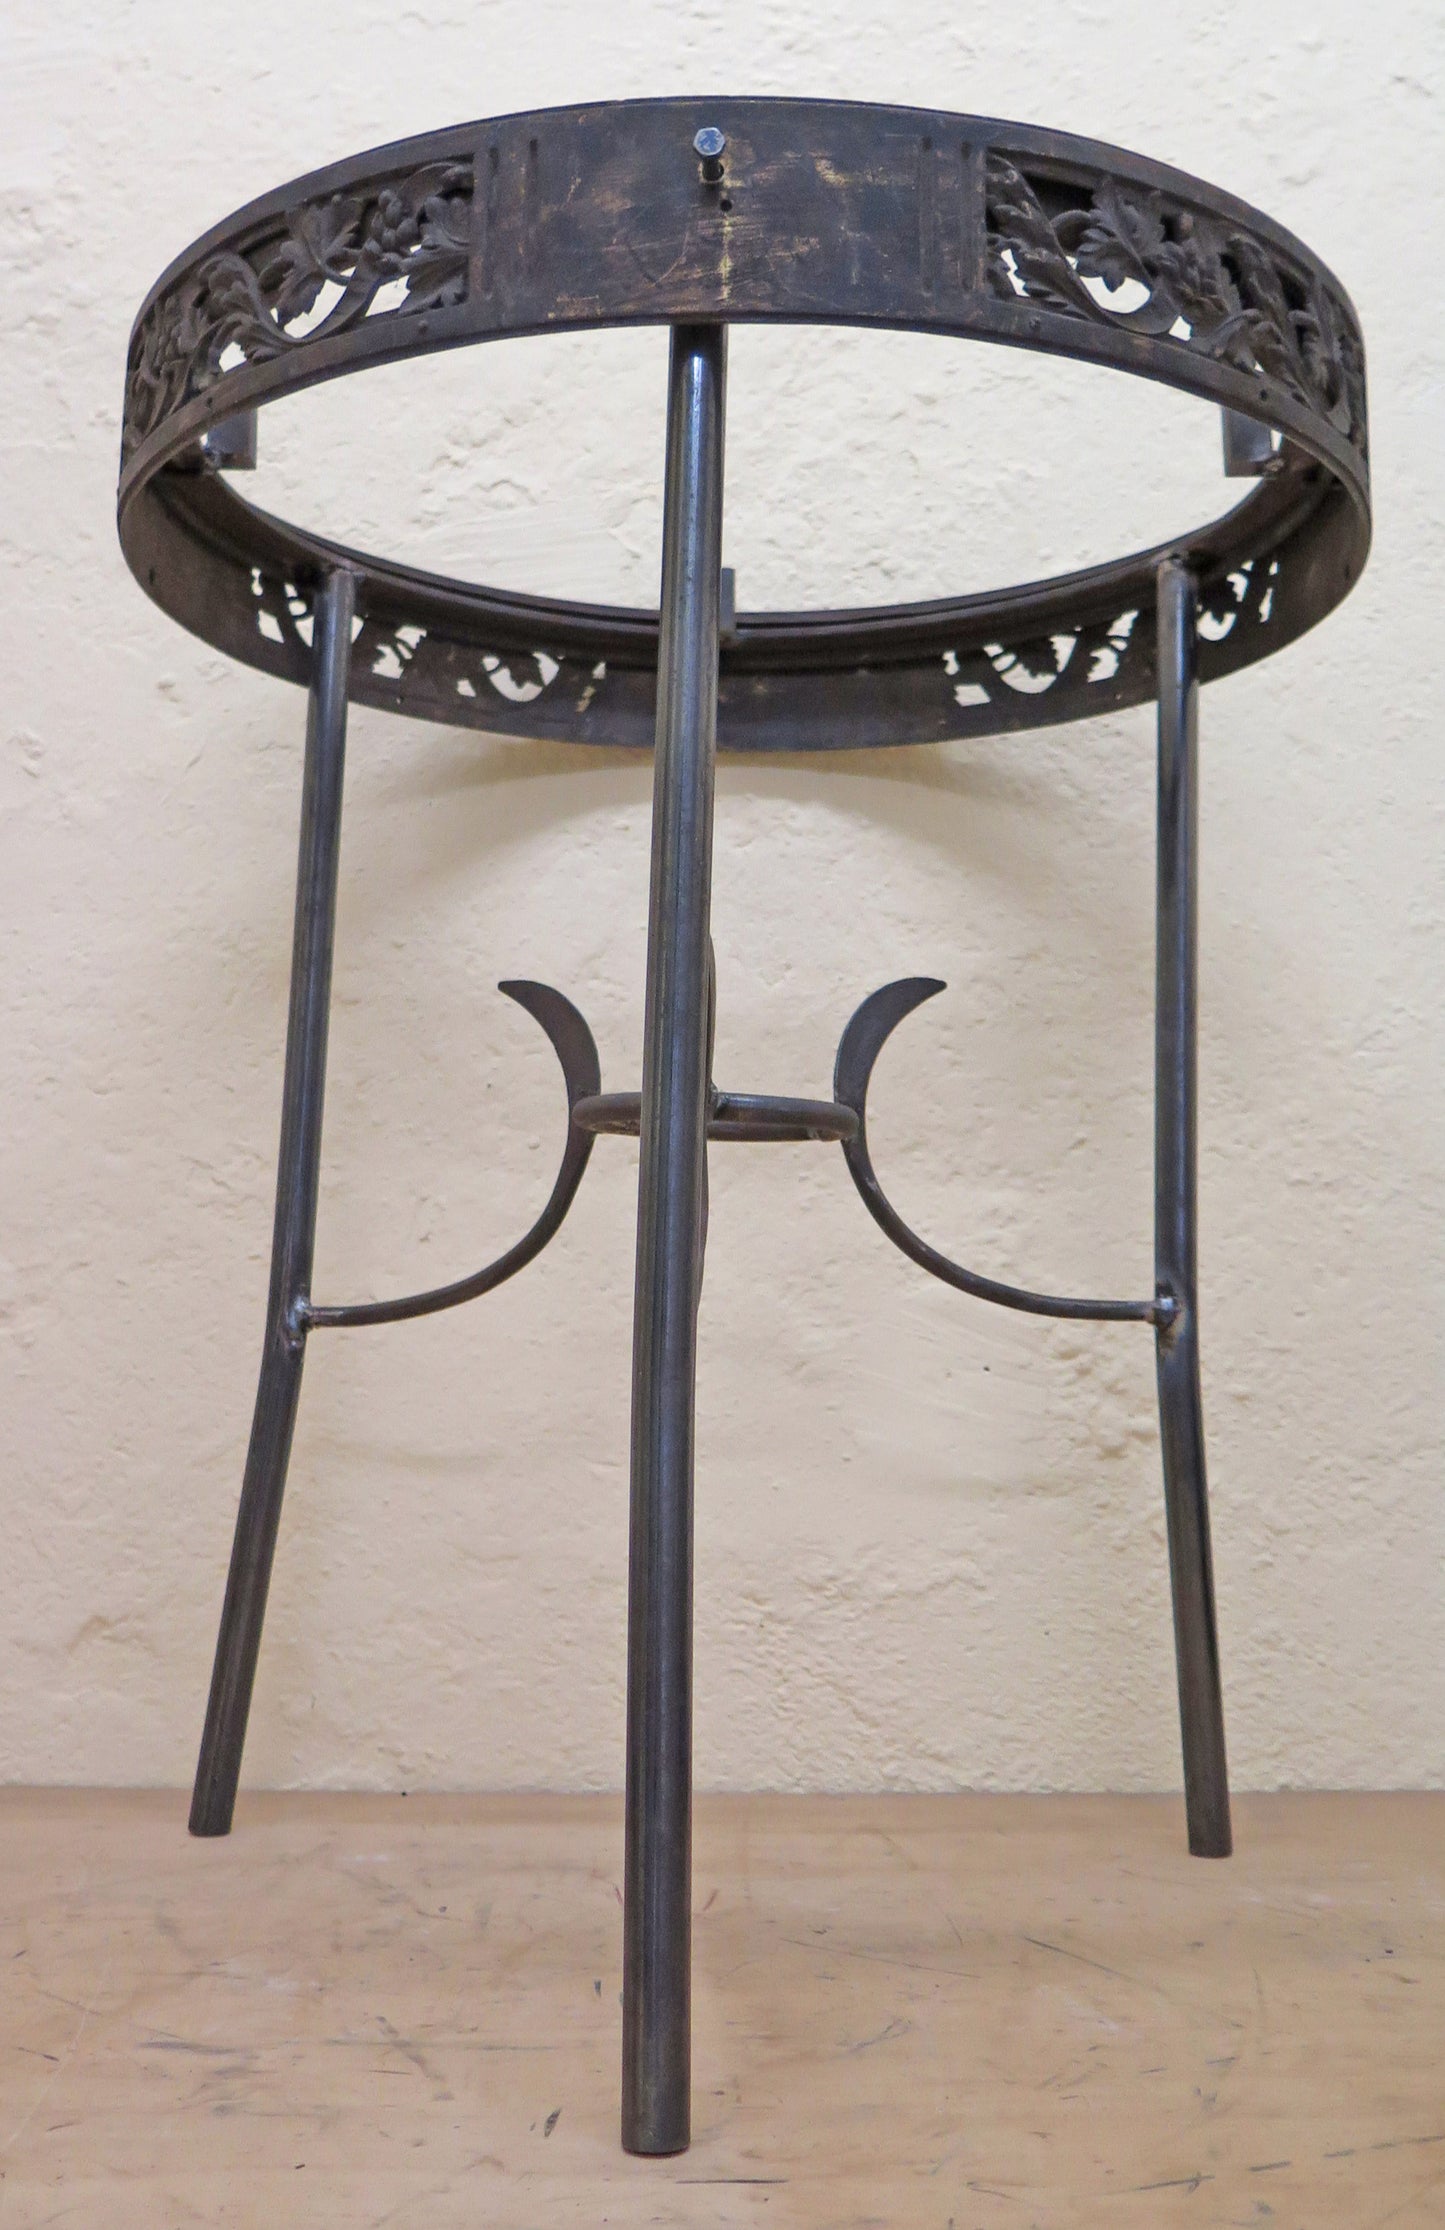 ROUND CIRCULAR WROUGHT IRON TABLE BASE HANDMADE VINTAGE CH